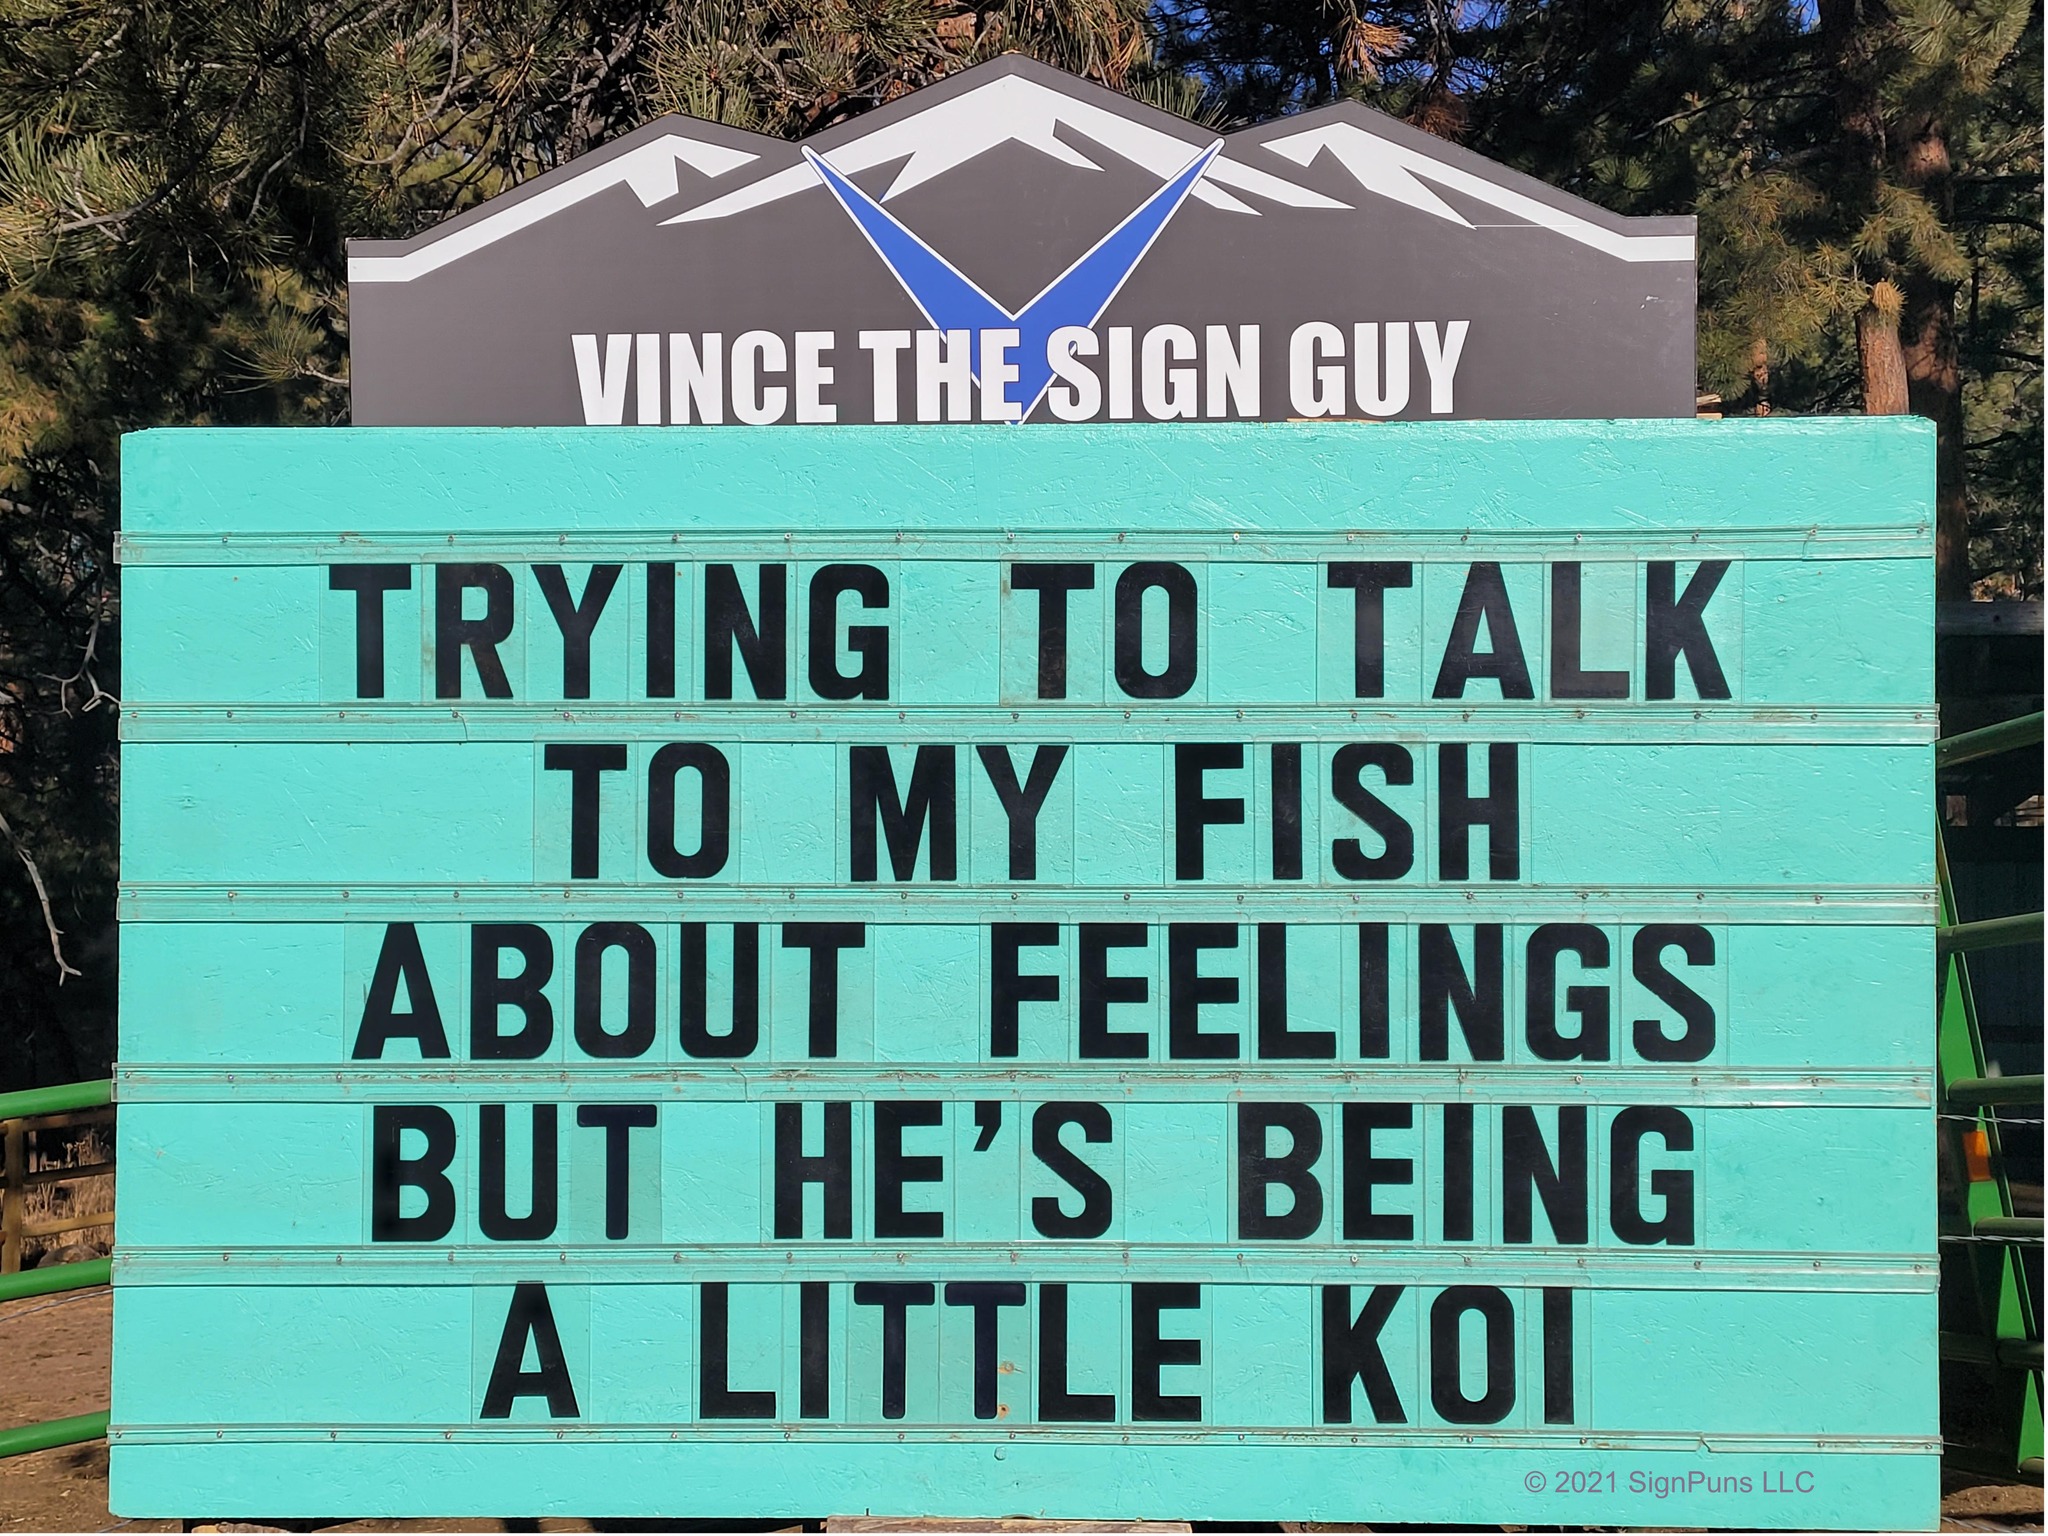 community sign that says: "trying to talk to my fish about feelings but he's being a little koi"